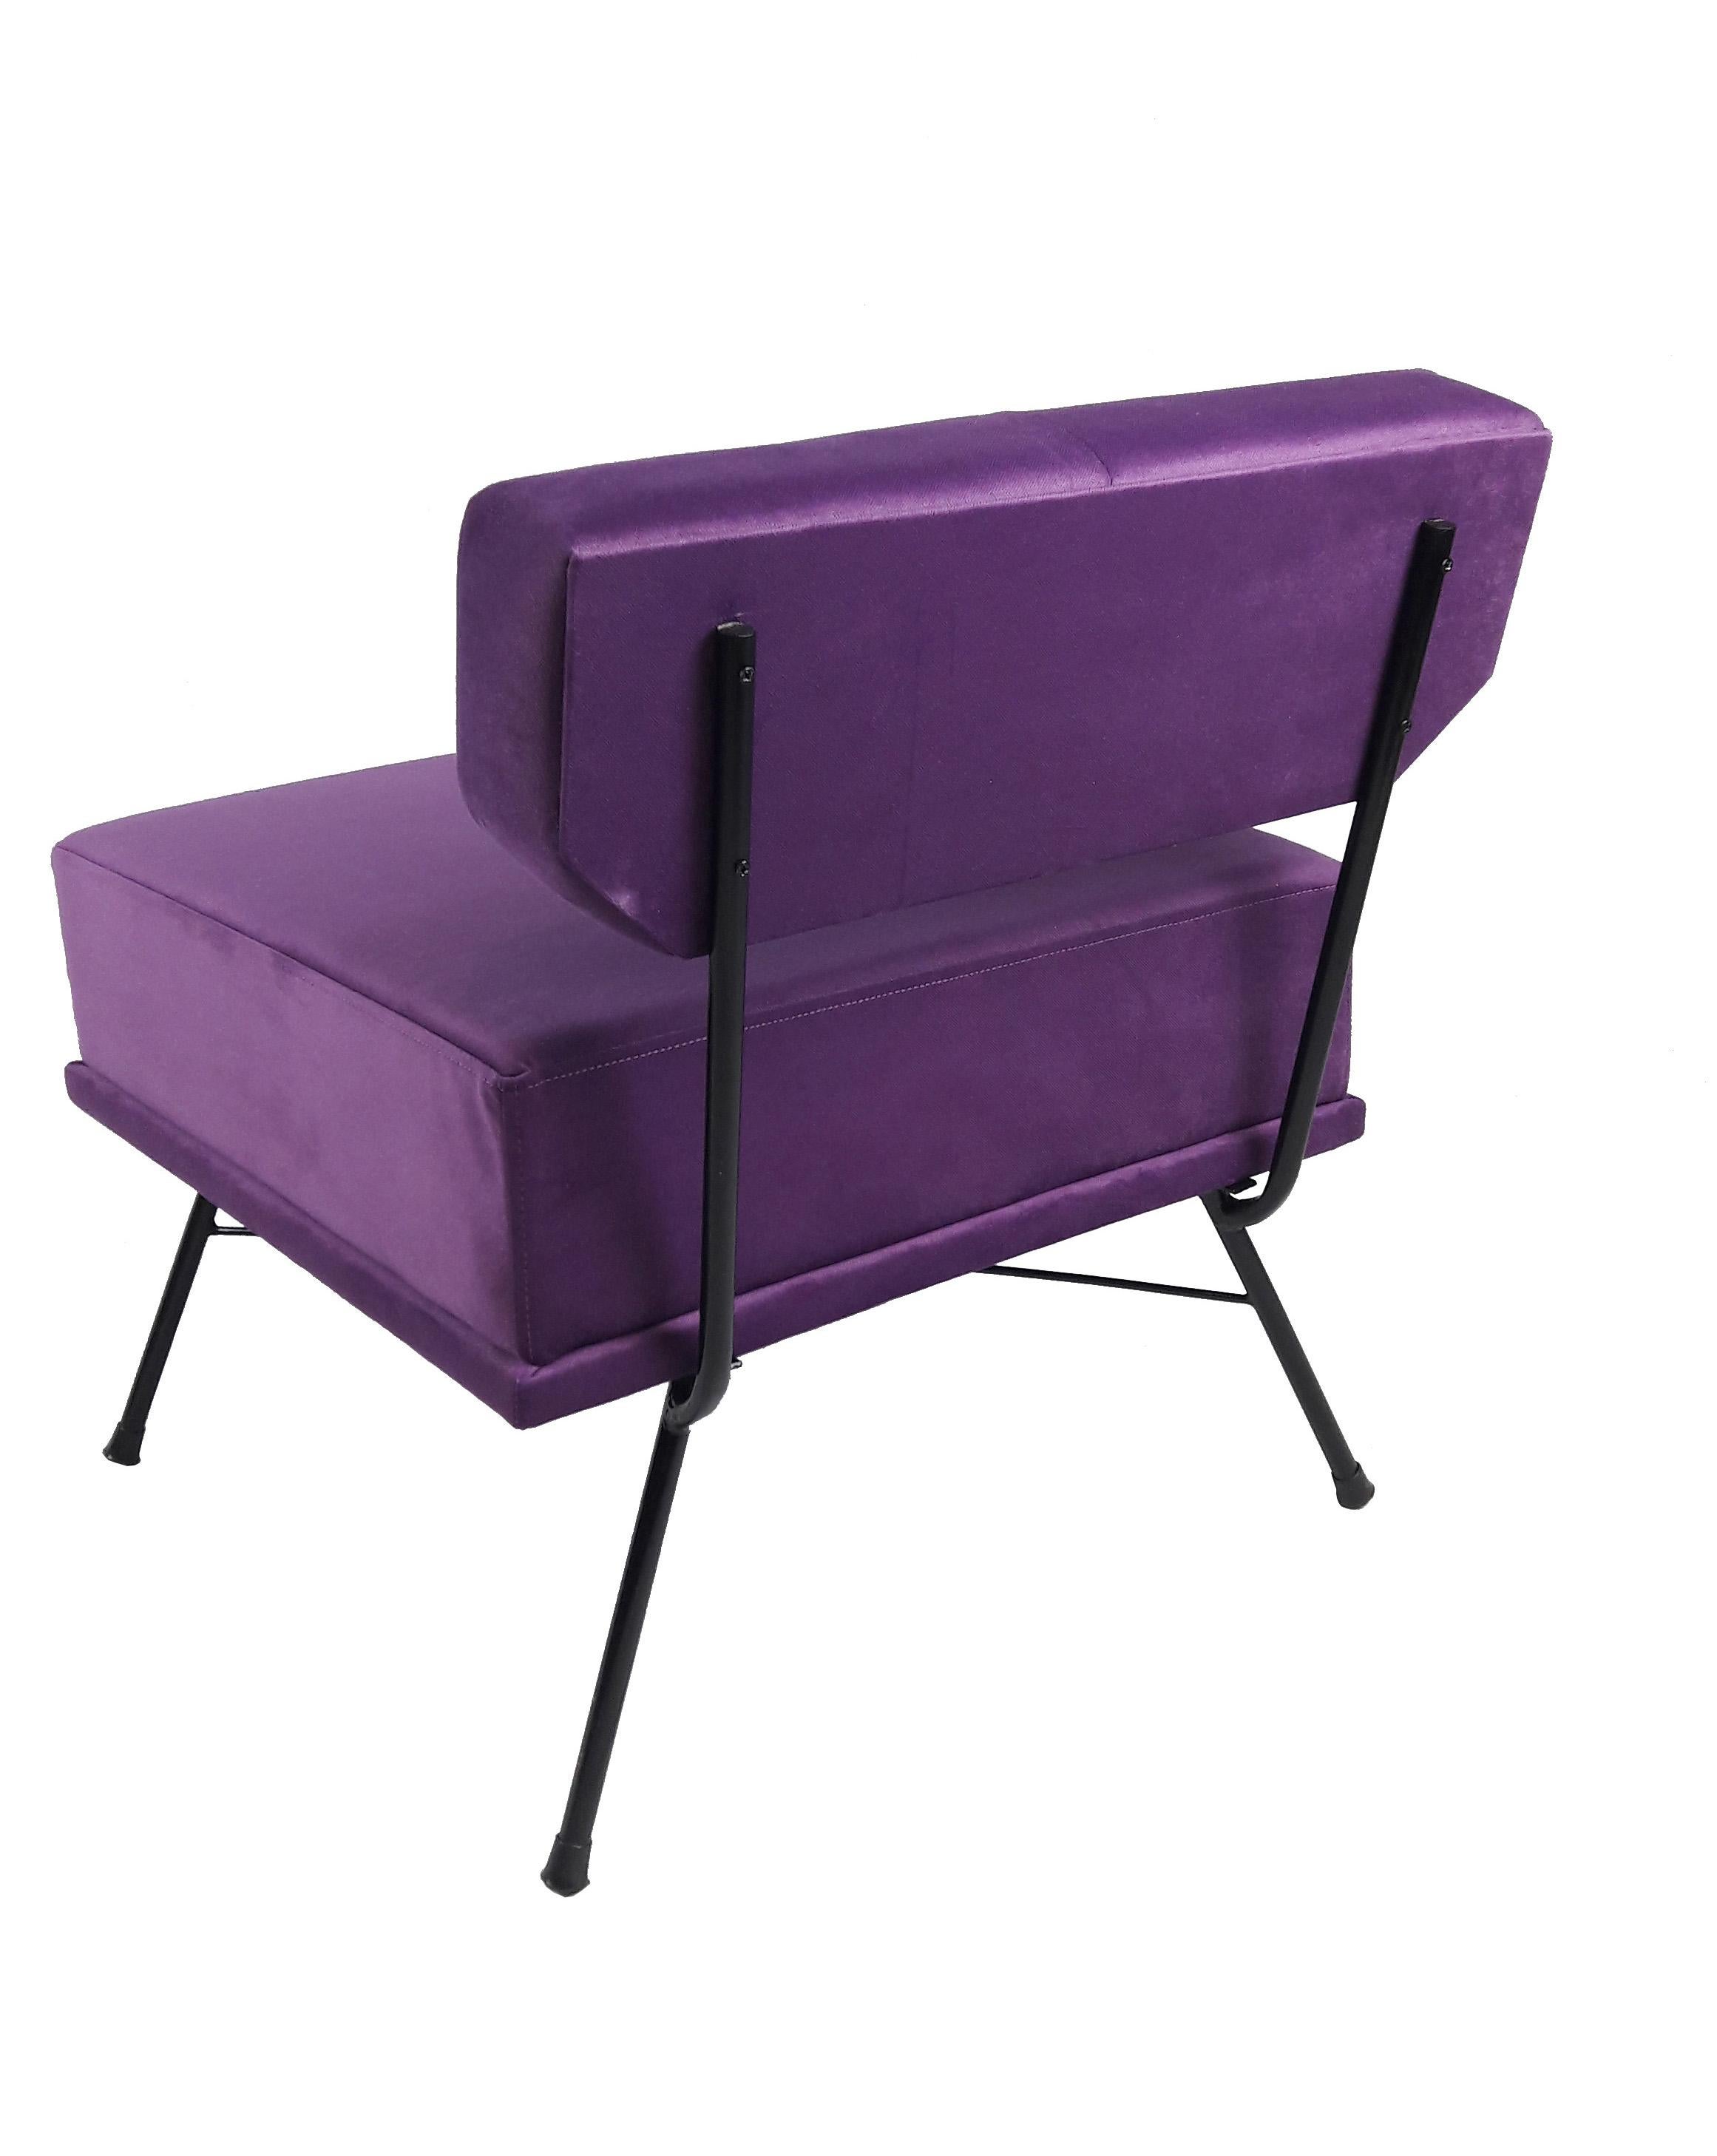 Enameled Midcentury Elettra's Style Italian Violet Armchair, 1950s For Sale